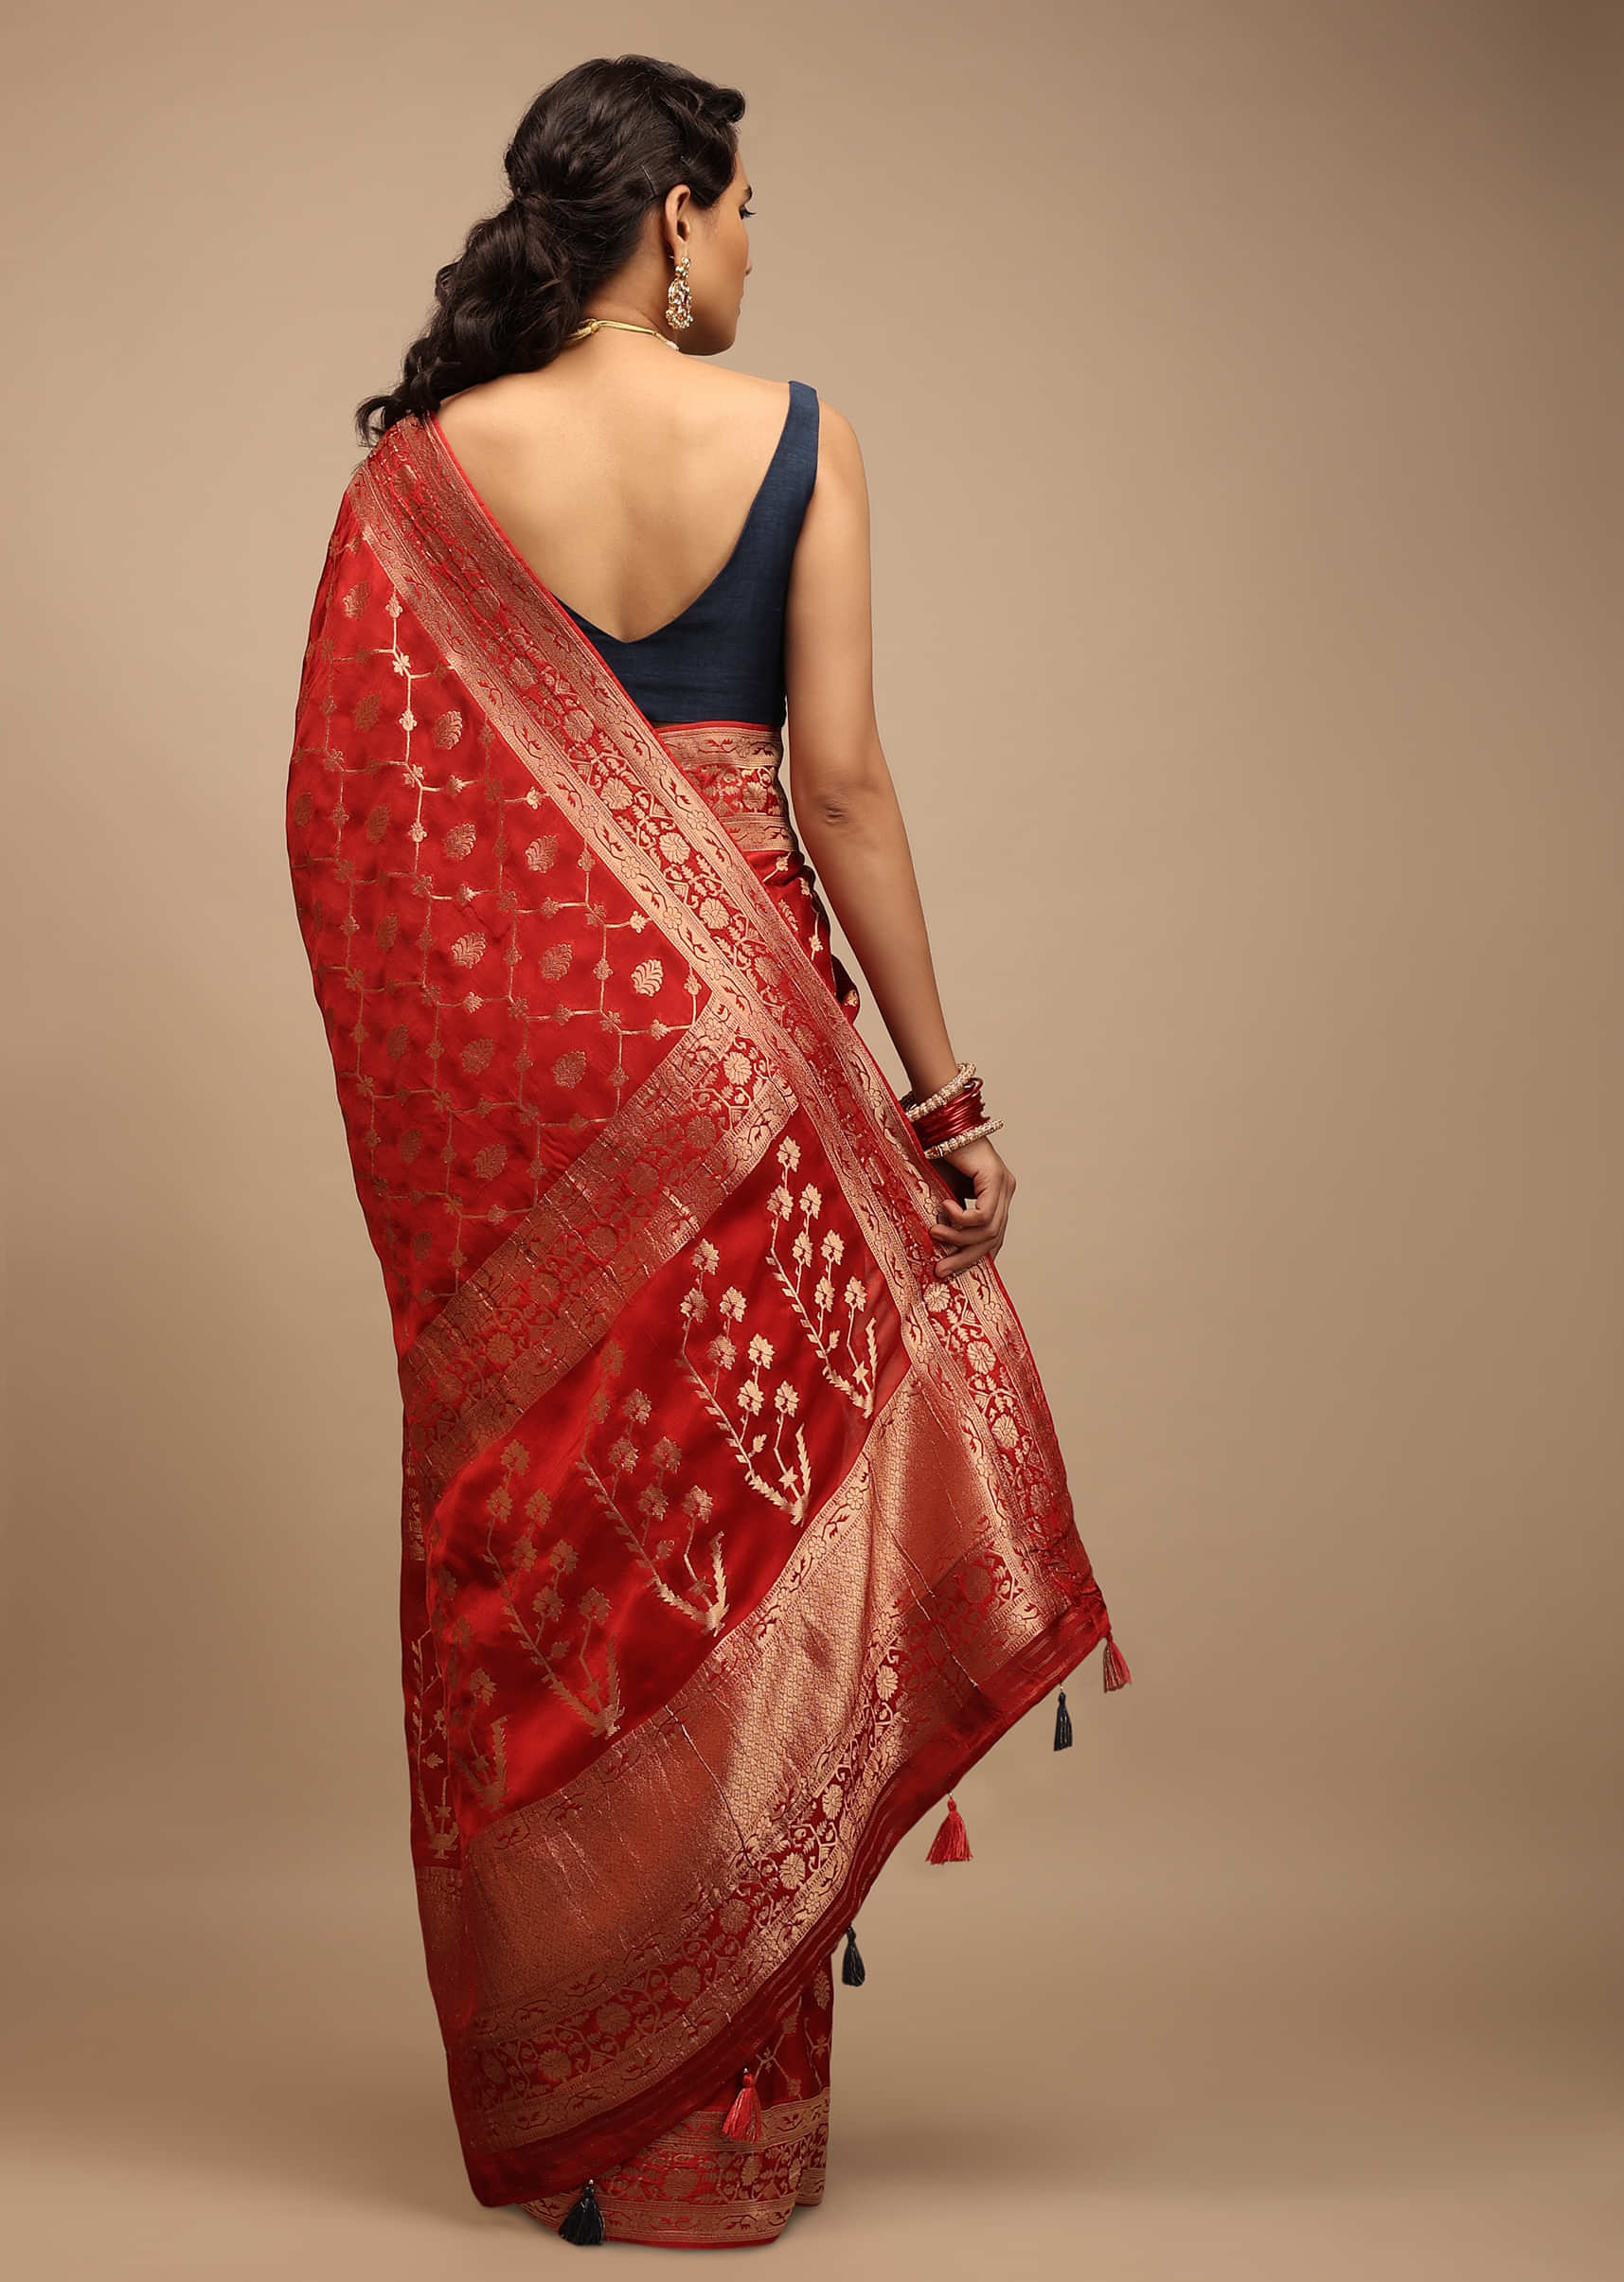 Fiery Red Saree In Satin Silk With Woven Geometric Jaal And Butti Design